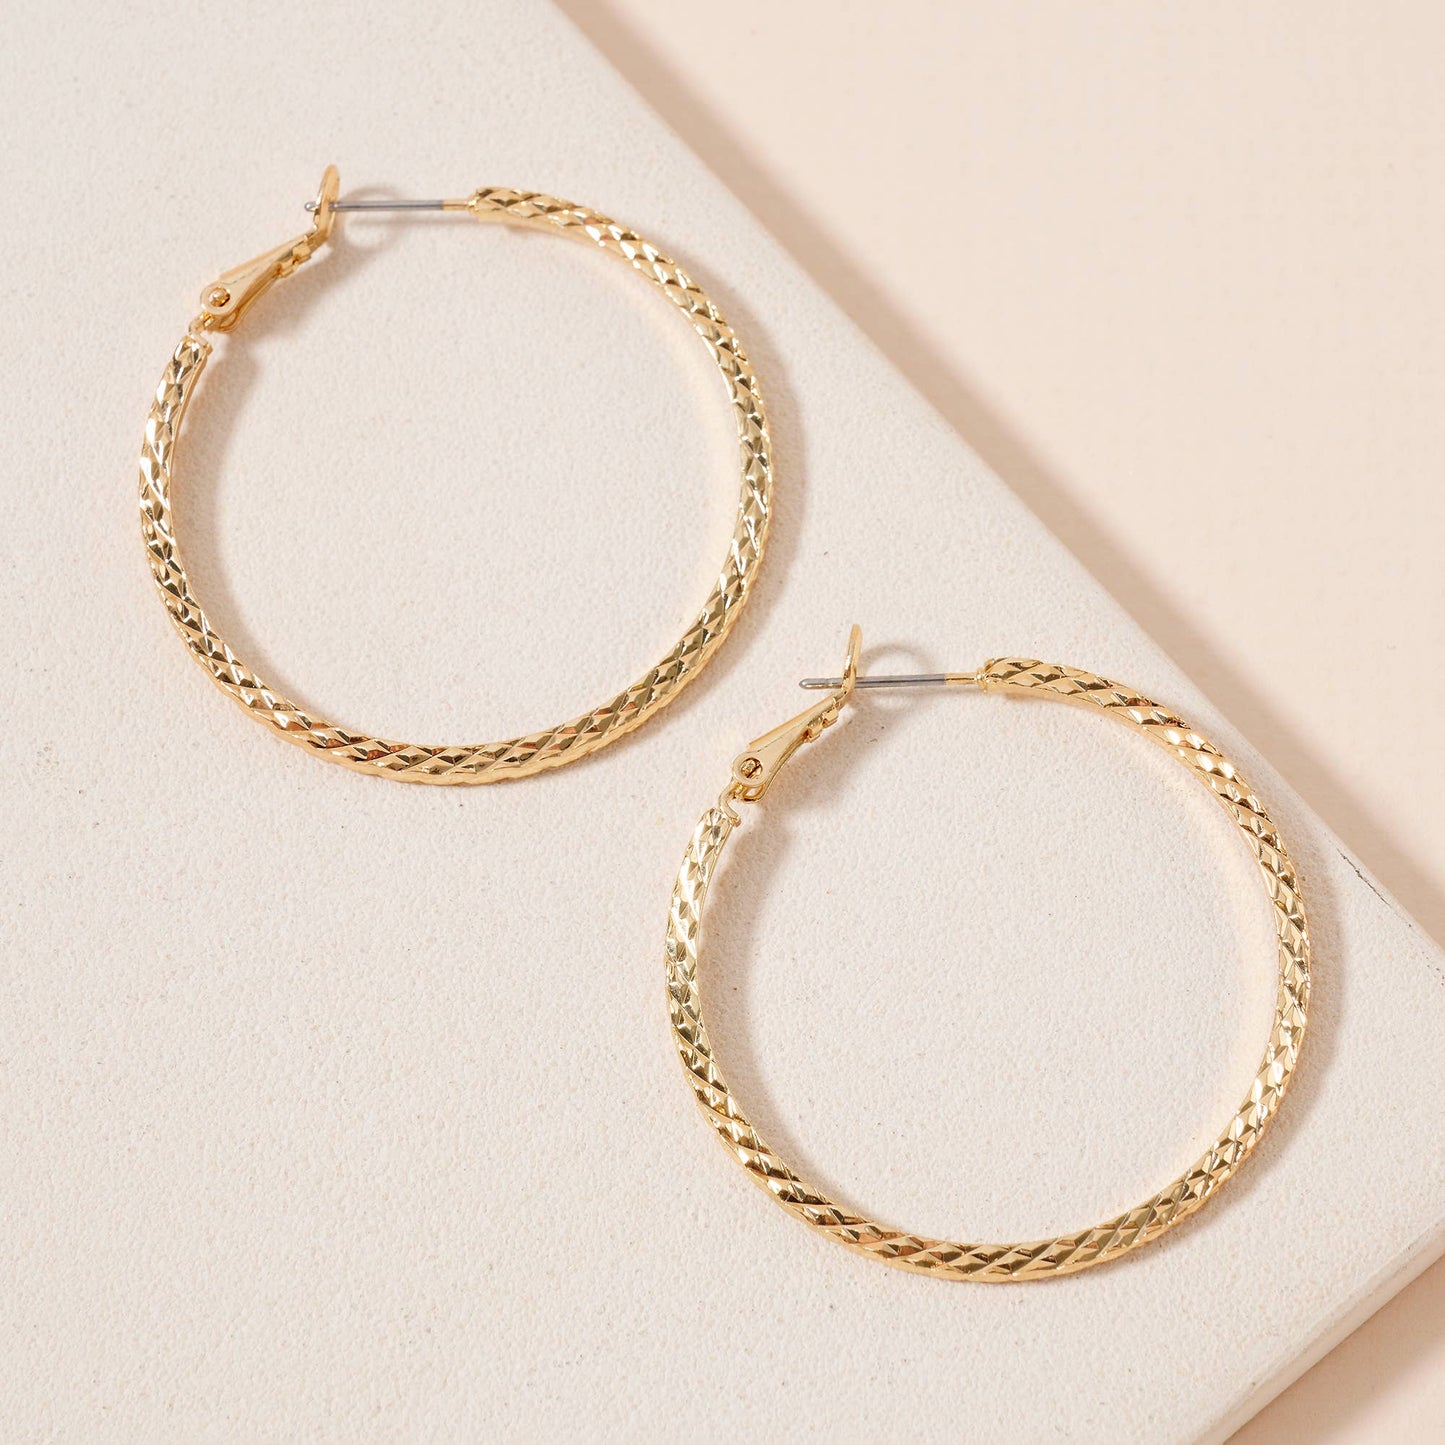 Textured Gold Hoop Earrings - Red Fox Boutique